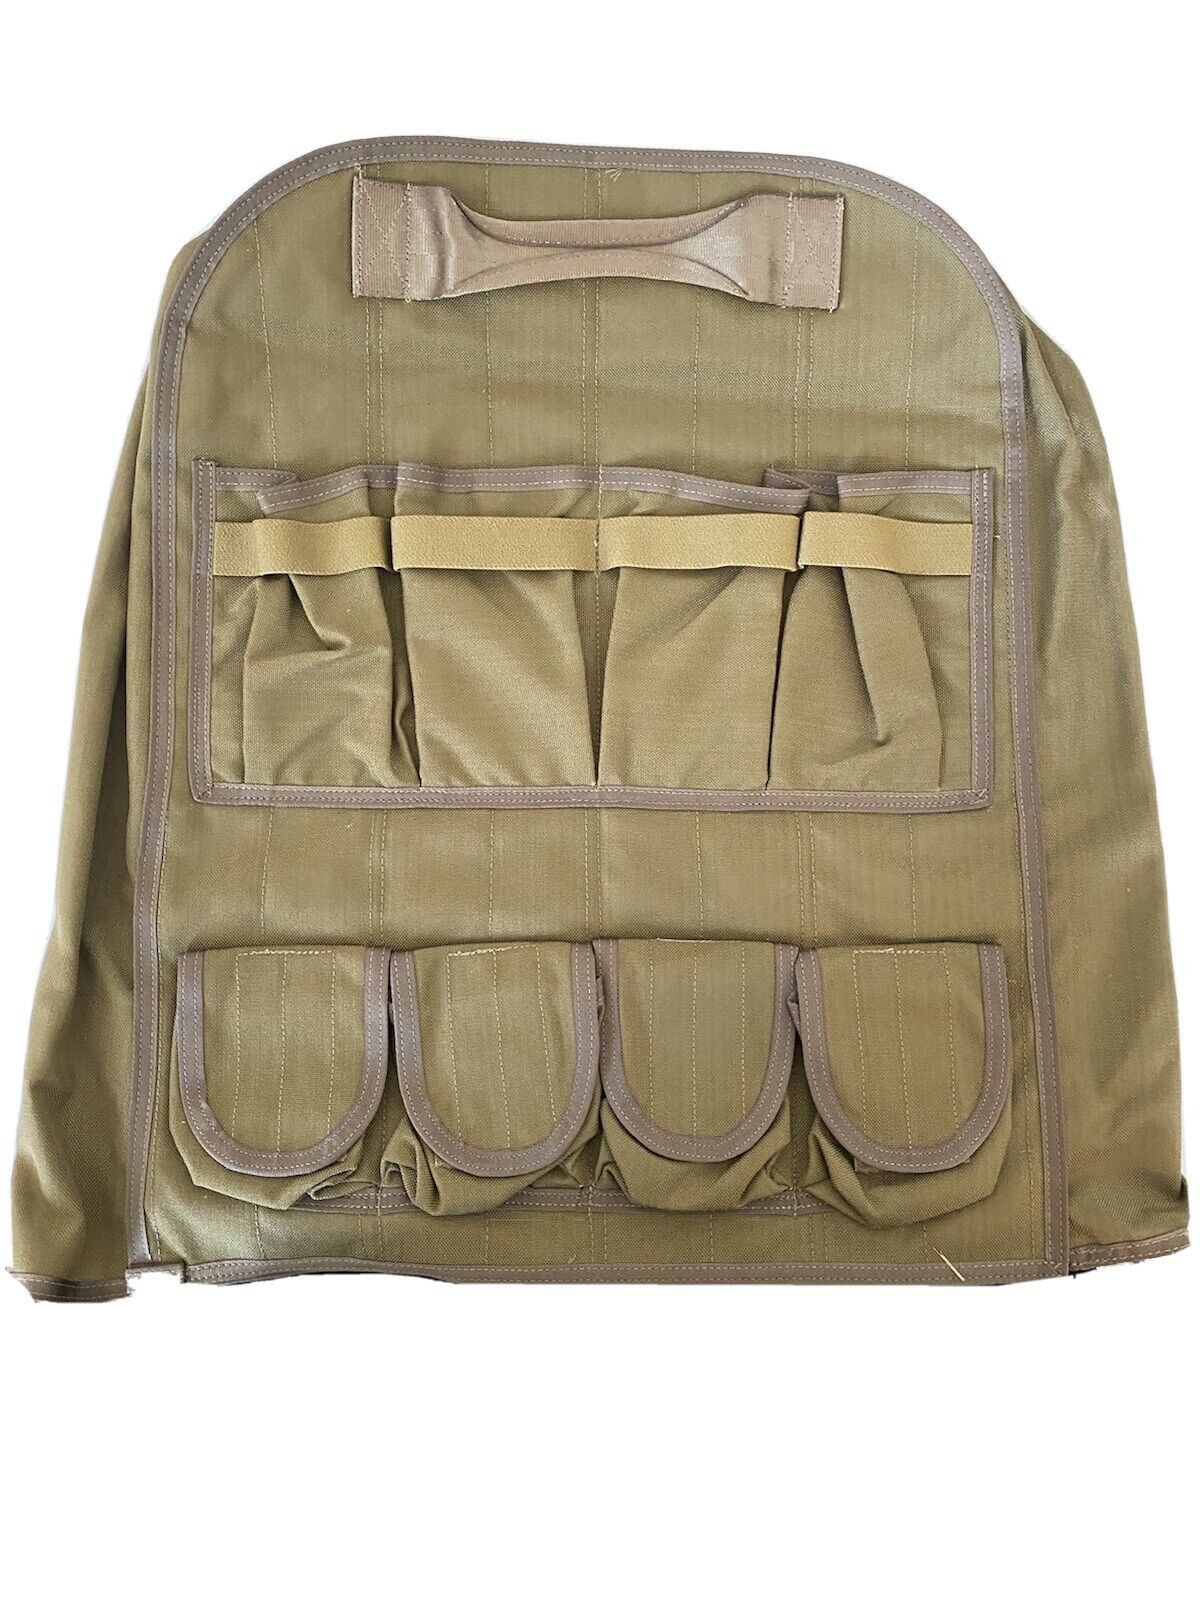 TSSI Tactical Car Seat Cover